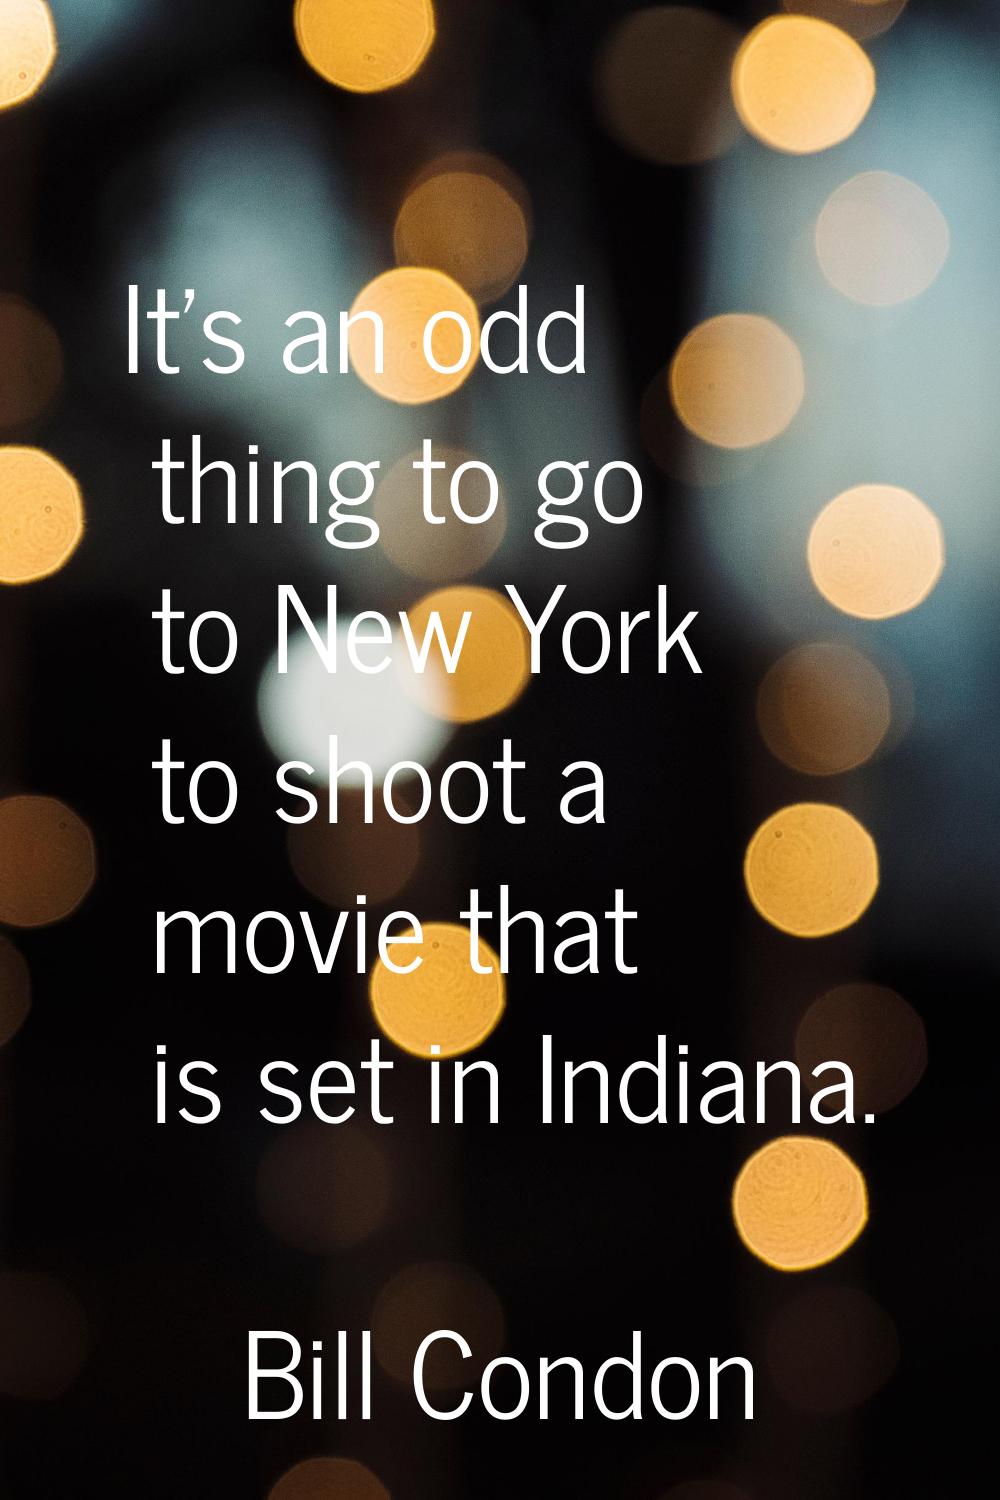 It's an odd thing to go to New York to shoot a movie that is set in Indiana.